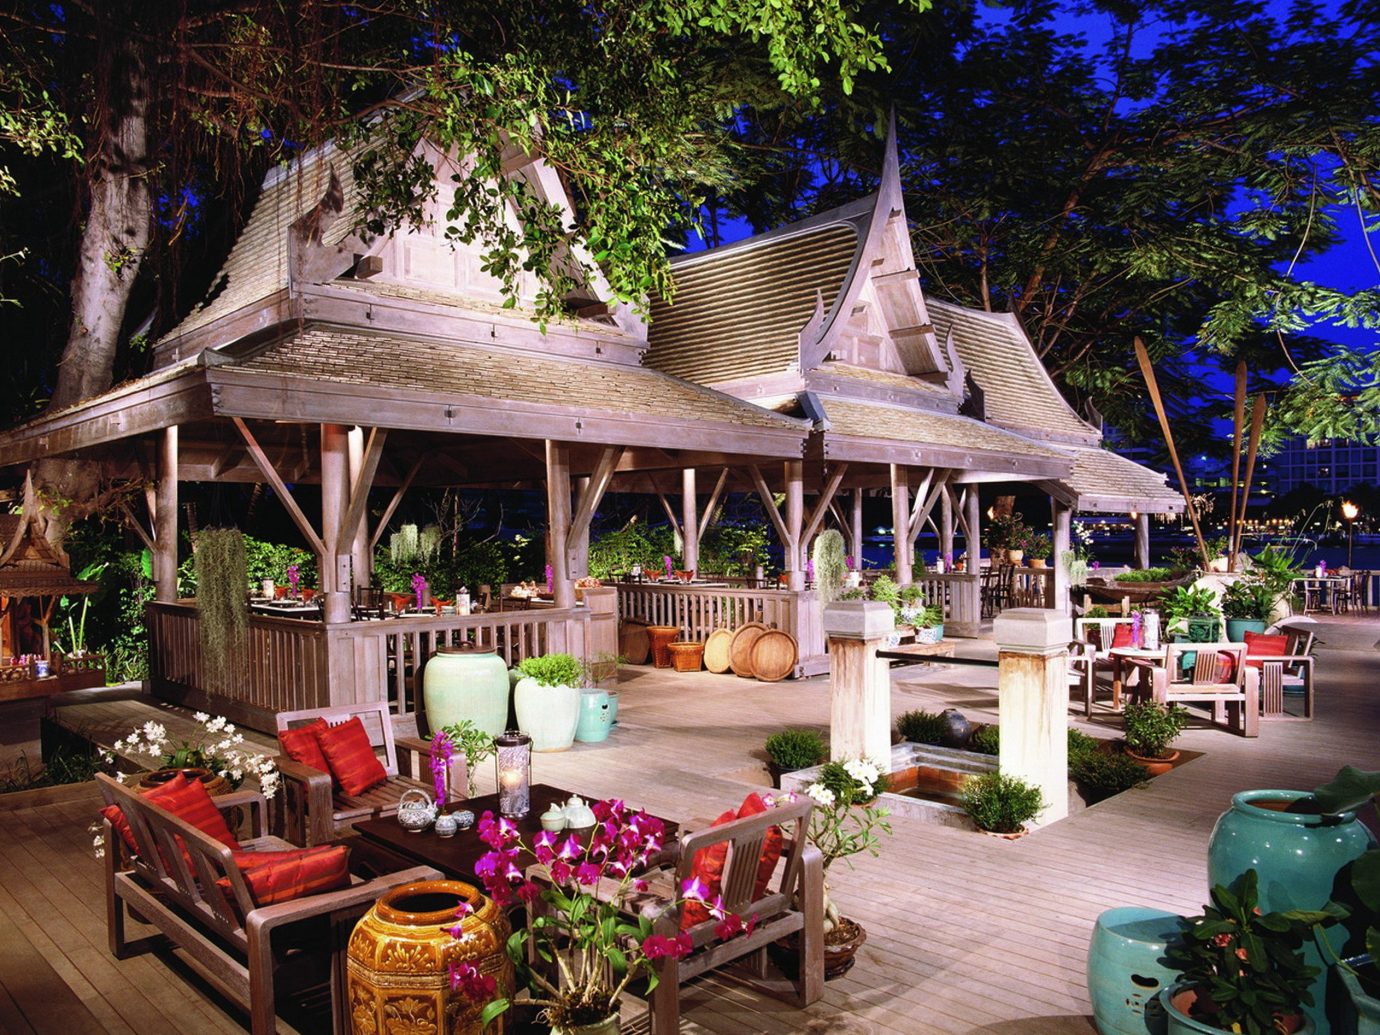 City Drink Eat Hotels Lounge Outdoors Patio Romance Terrace tree outdoor building Resort restaurant estate flower outdoor structure furniture decorated Garden several